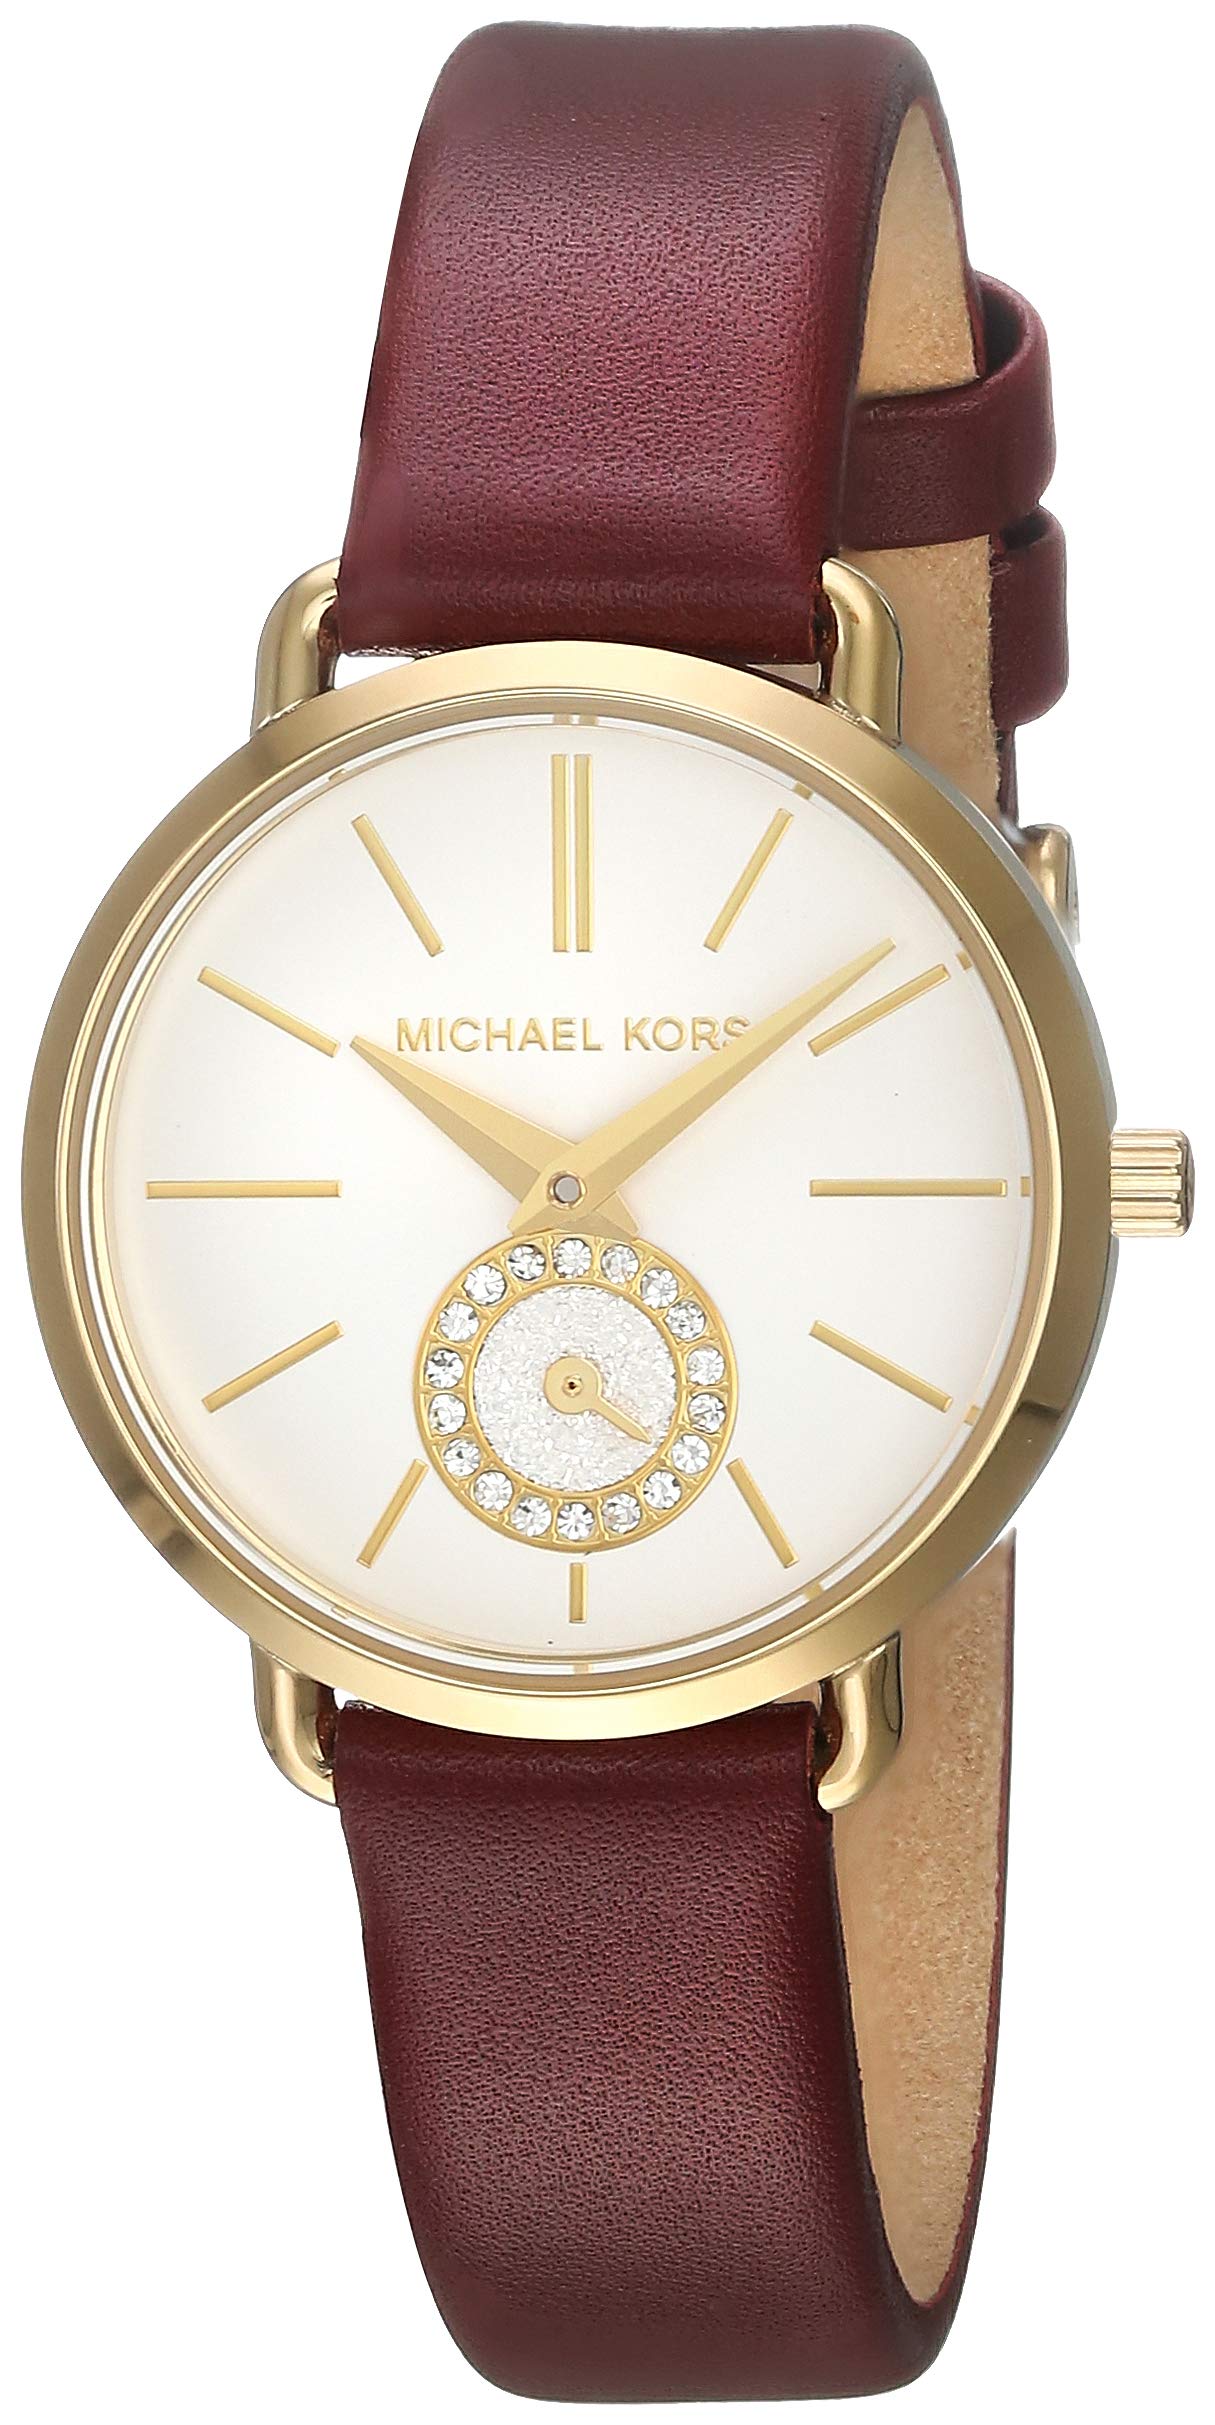 Michael Kors Women's Portia Stainless Steel Quartz Watch with Leather Strap, red, 12 (Model: MK2751), Red/28Mm, One Size